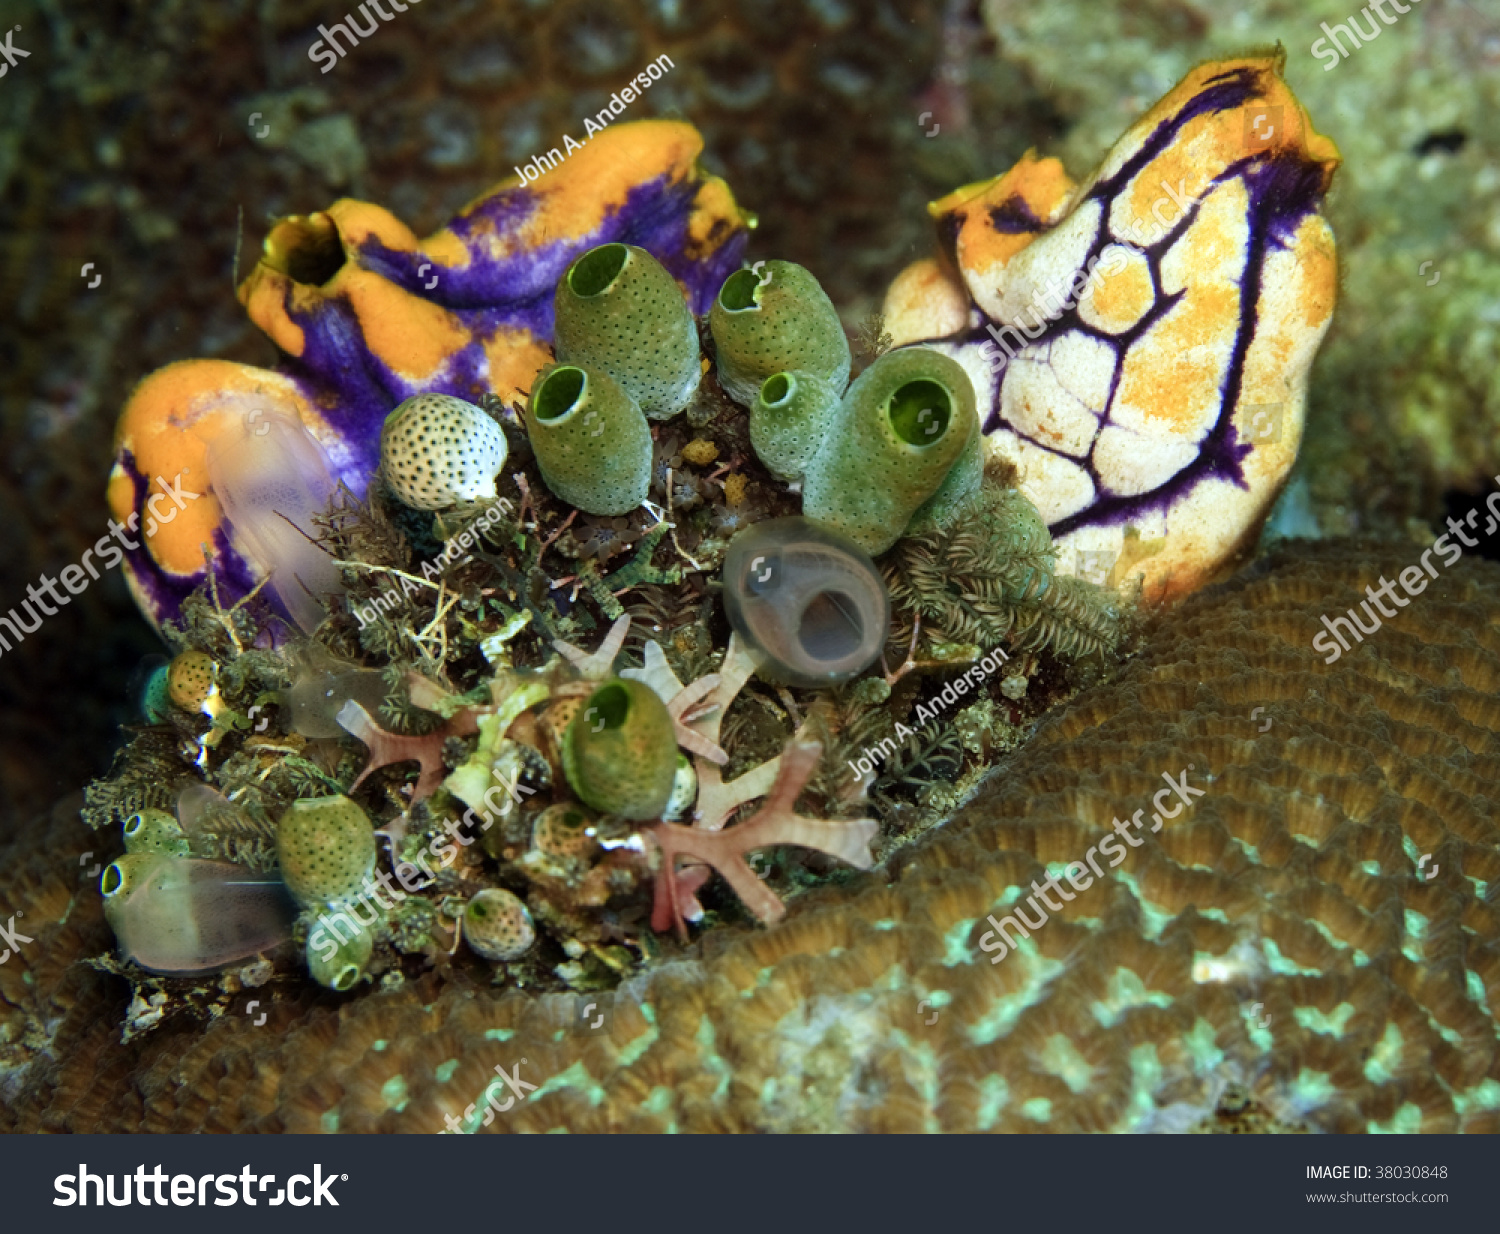 Sea Squirt And Tunicates Growing On Brain Coral On Coral Reef Stock